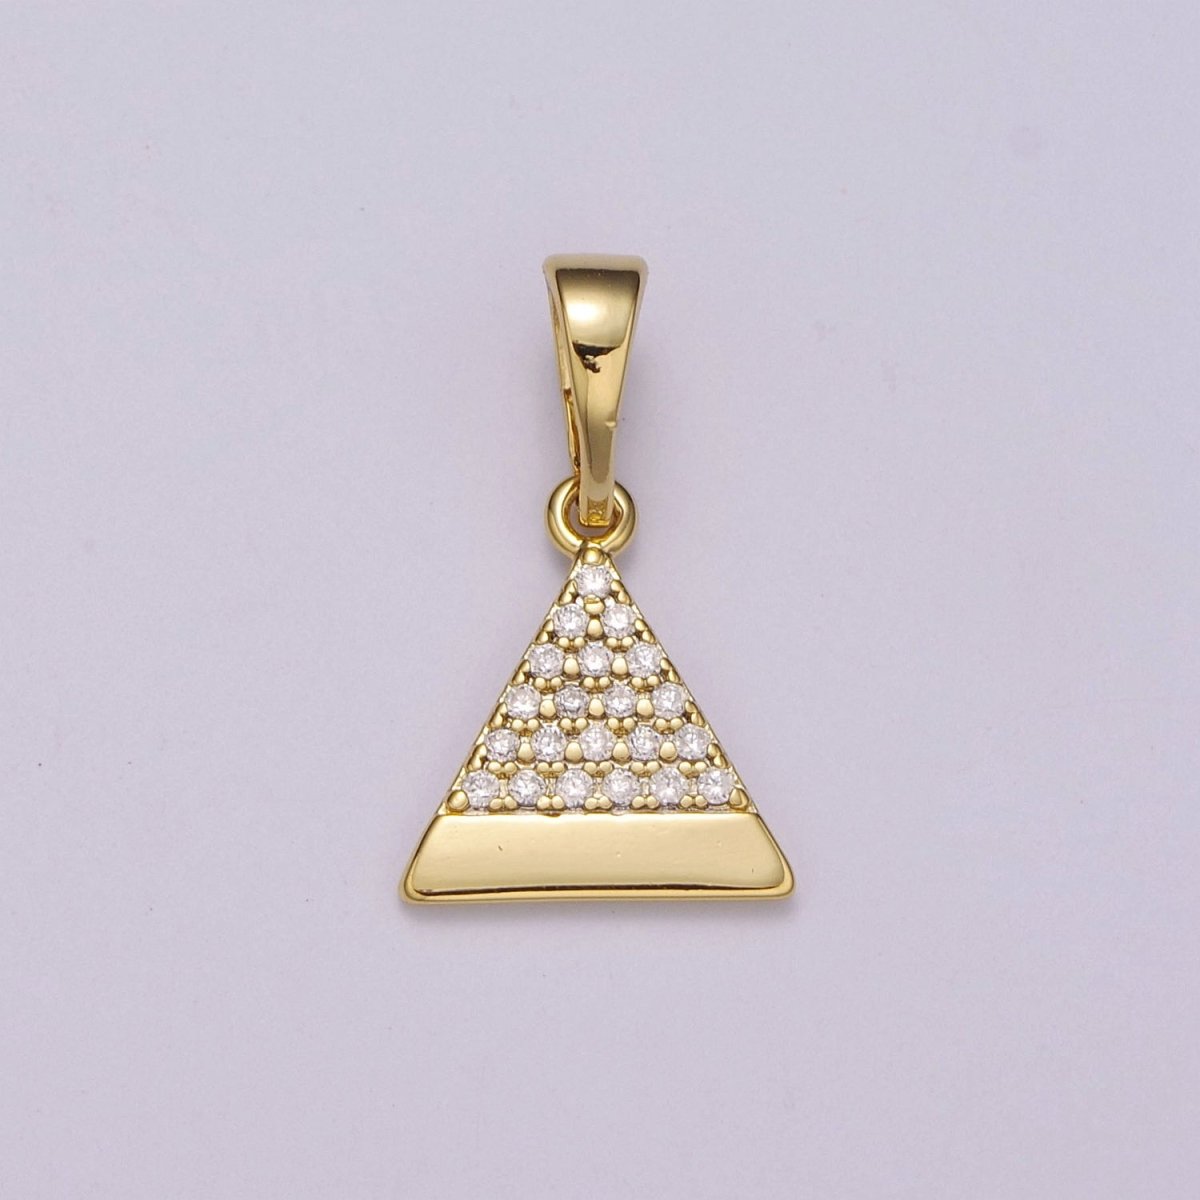 14k gold Filled Pyramid Pendant Dainty Triangle Charm for Necklace Bracelet Earring N-1410 - DLUXCA